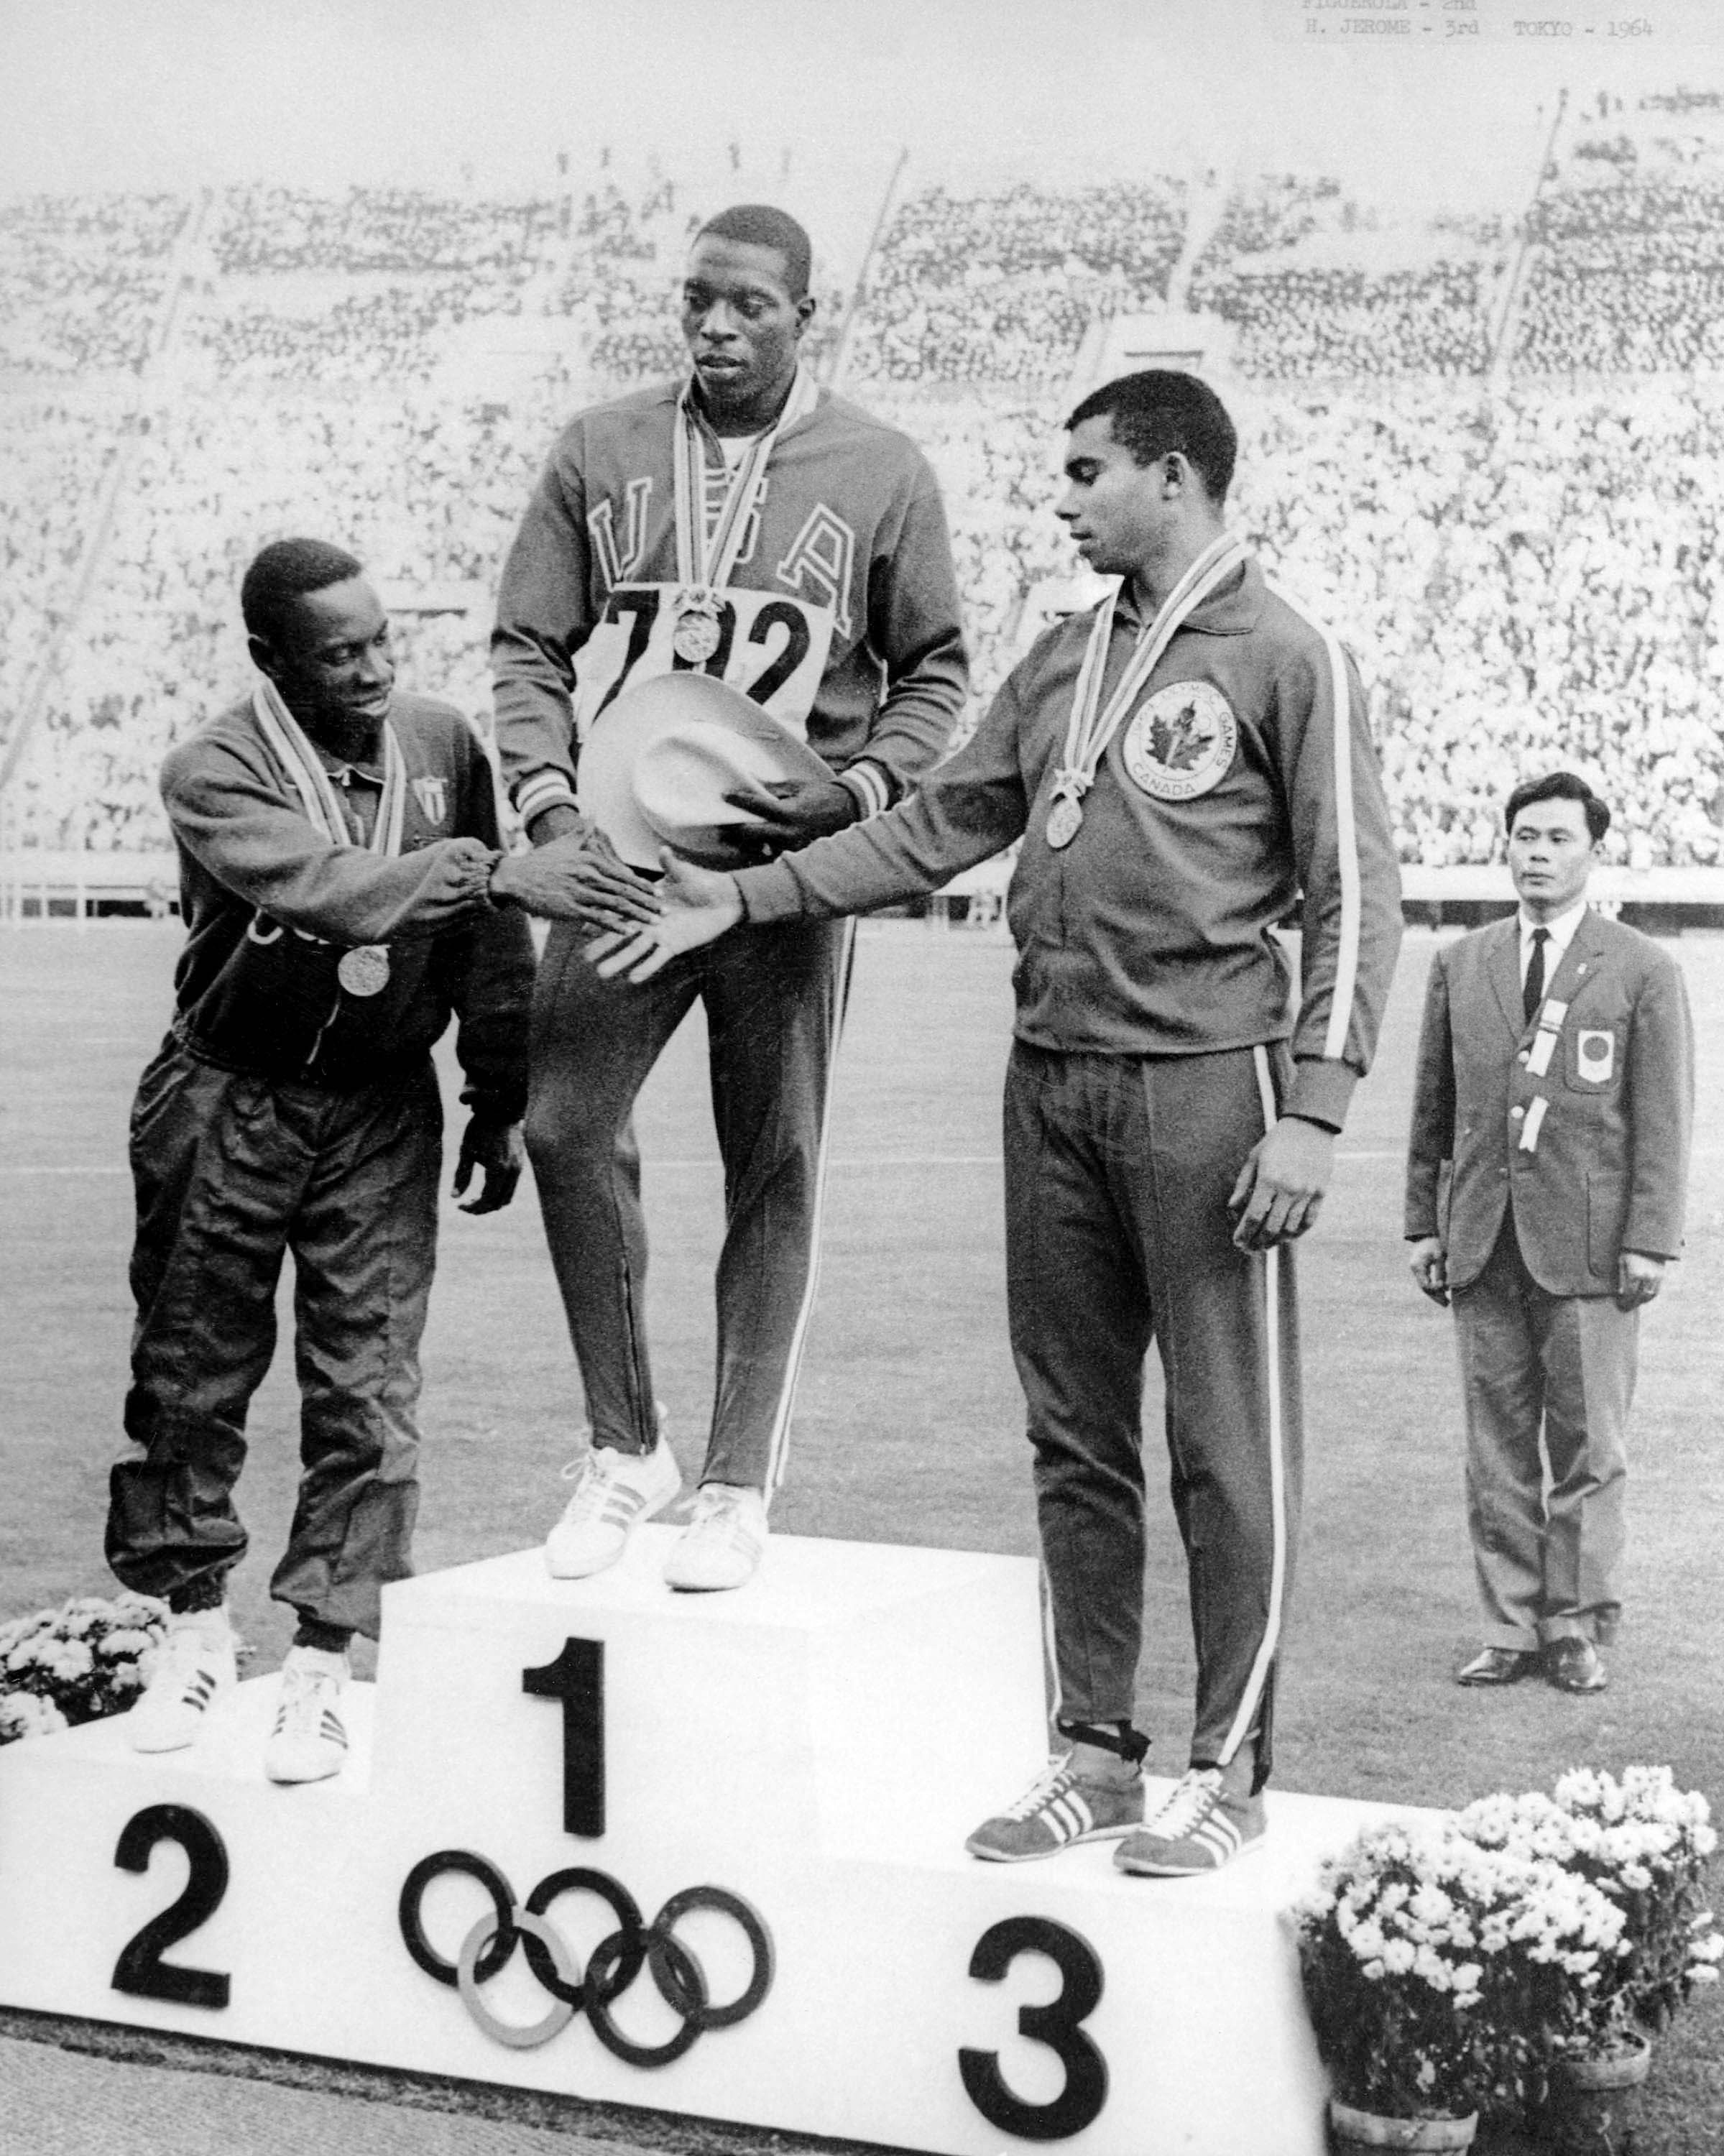 Harry Jerome (right) celebrates his bronze medal win in the 100m athletics event at the Tokyo 1964 Olympic Games. (CP Photo/COC)